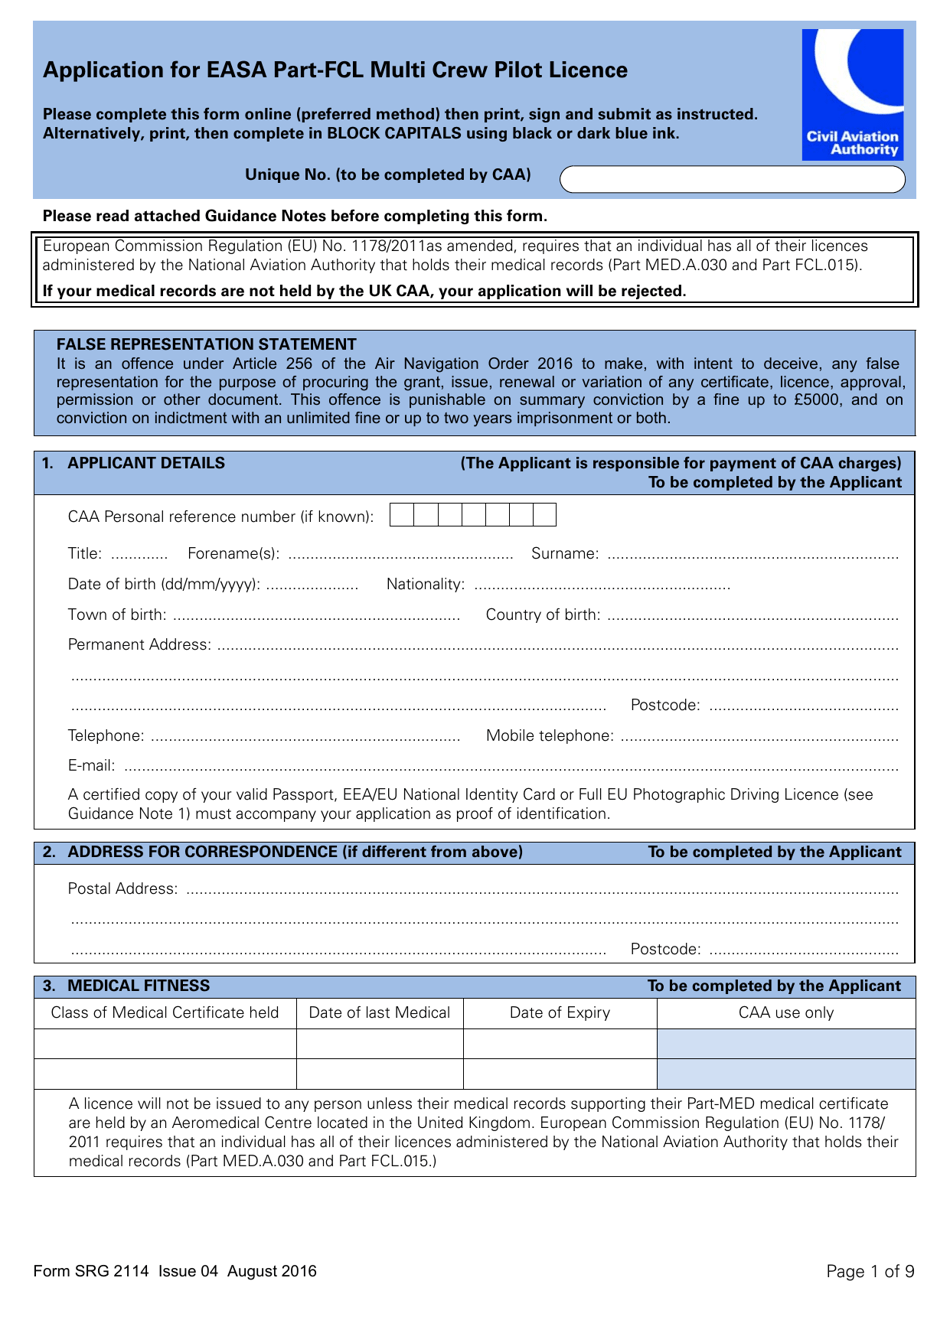 Form SRG2114 Application for Easa Part-Fcl Multi Crew Pilot Licence - United Kingdom, Page 1